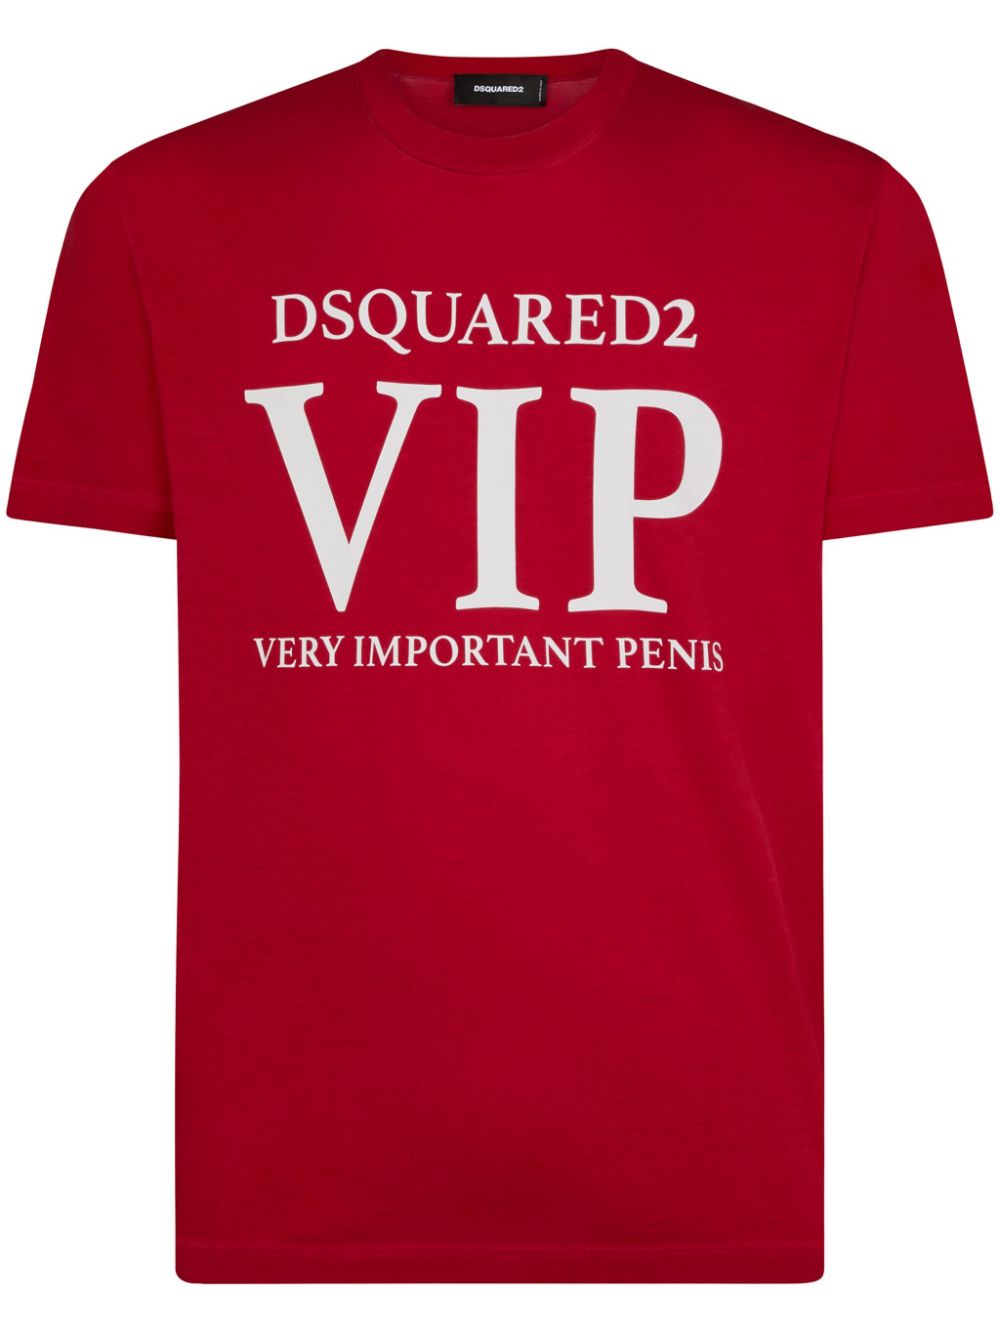 Dsquared2 VIP Cool Fit T-Shirt - Rot von Dsquared2